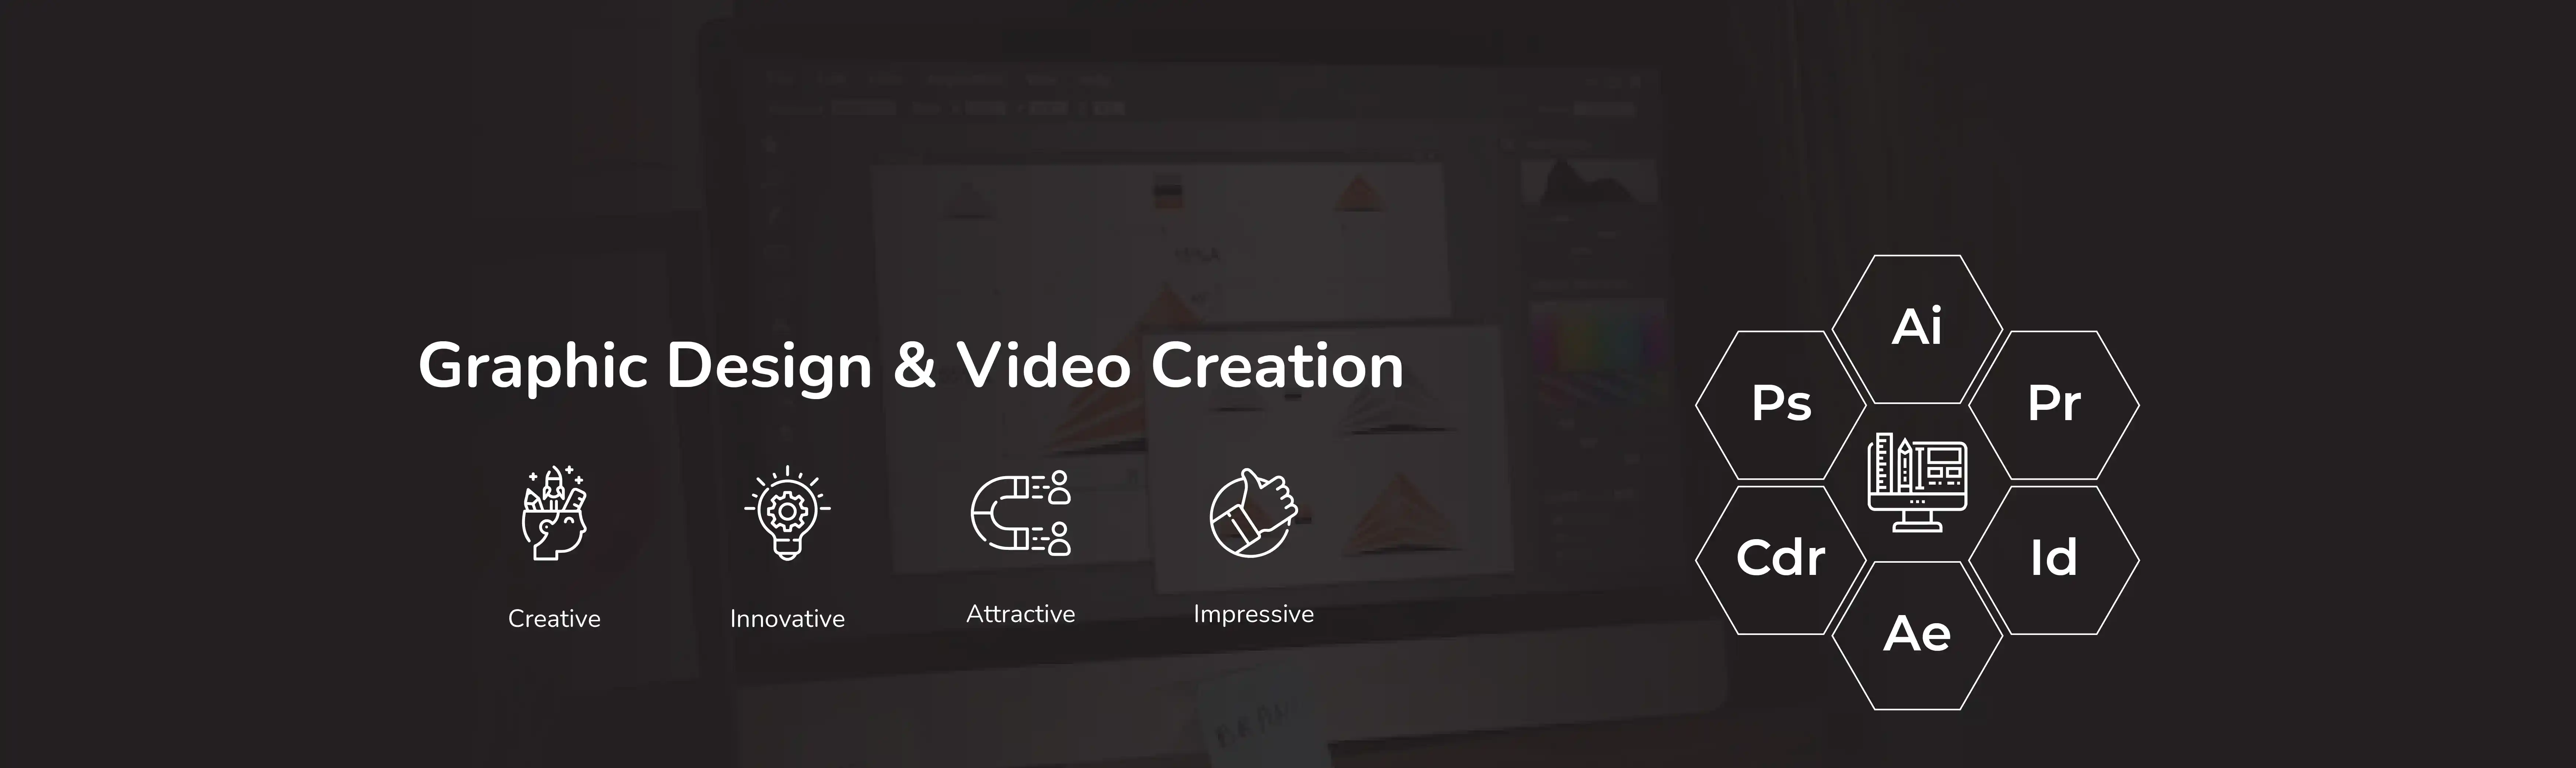 graphic design video creation home banner